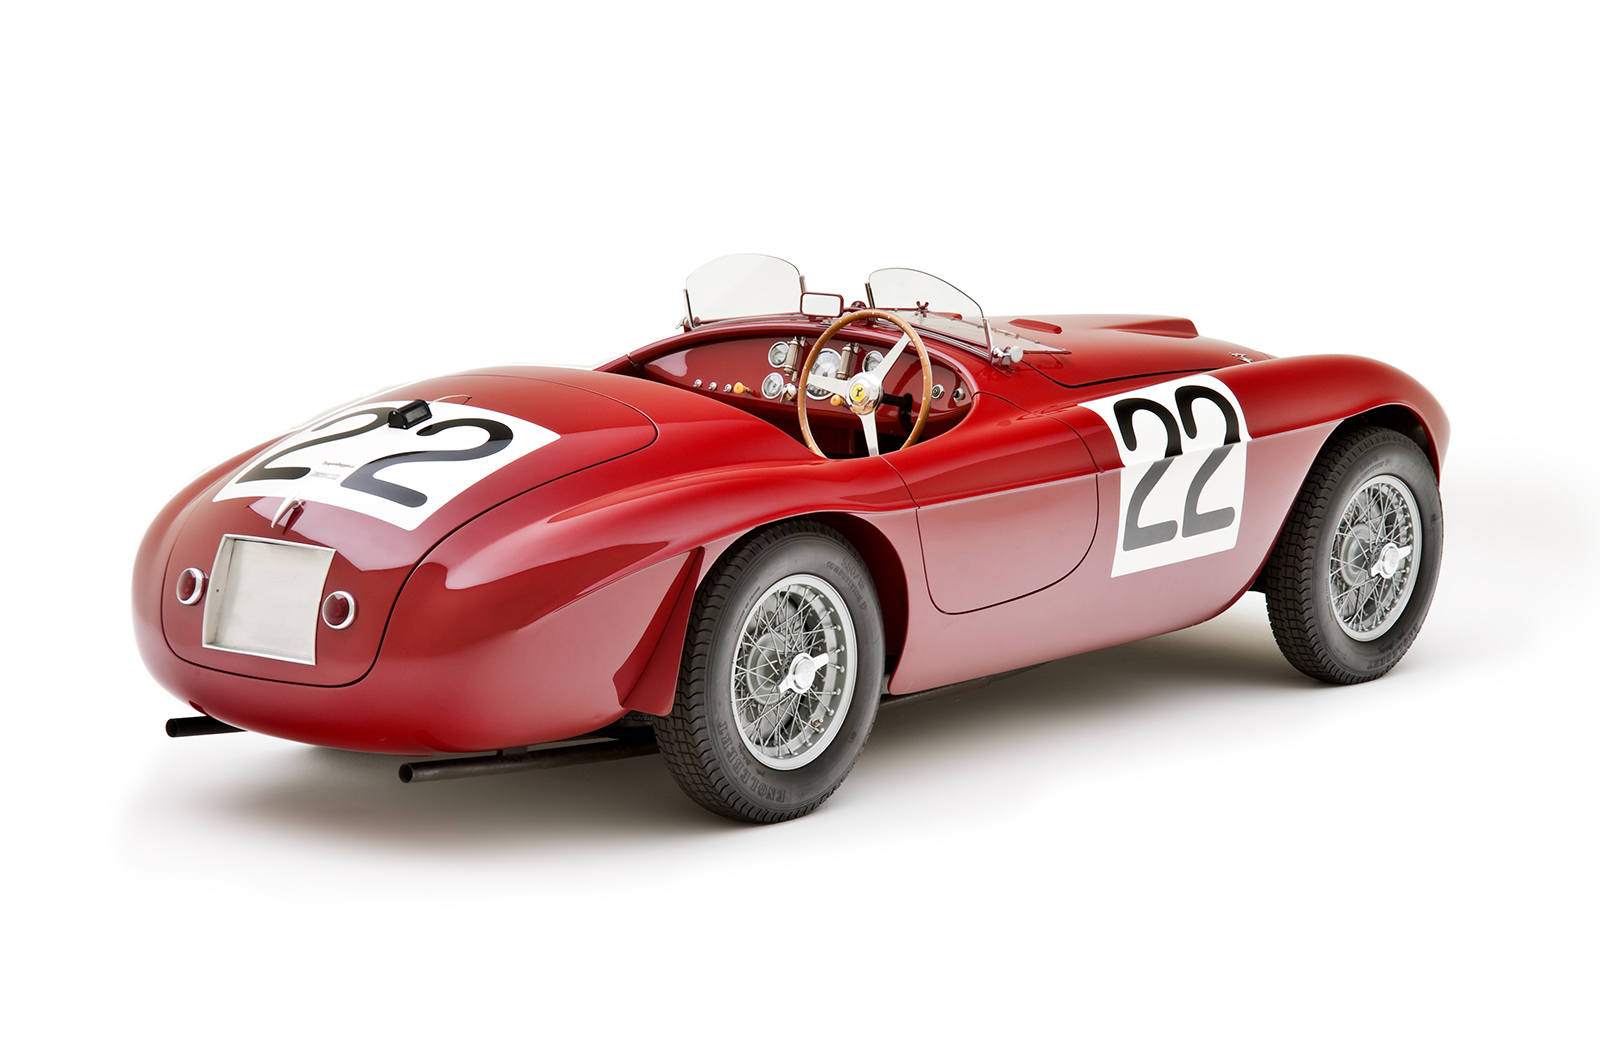 Classic & Sports Car – Fabulous Ferrari 166MM to star at Concours of Elegance